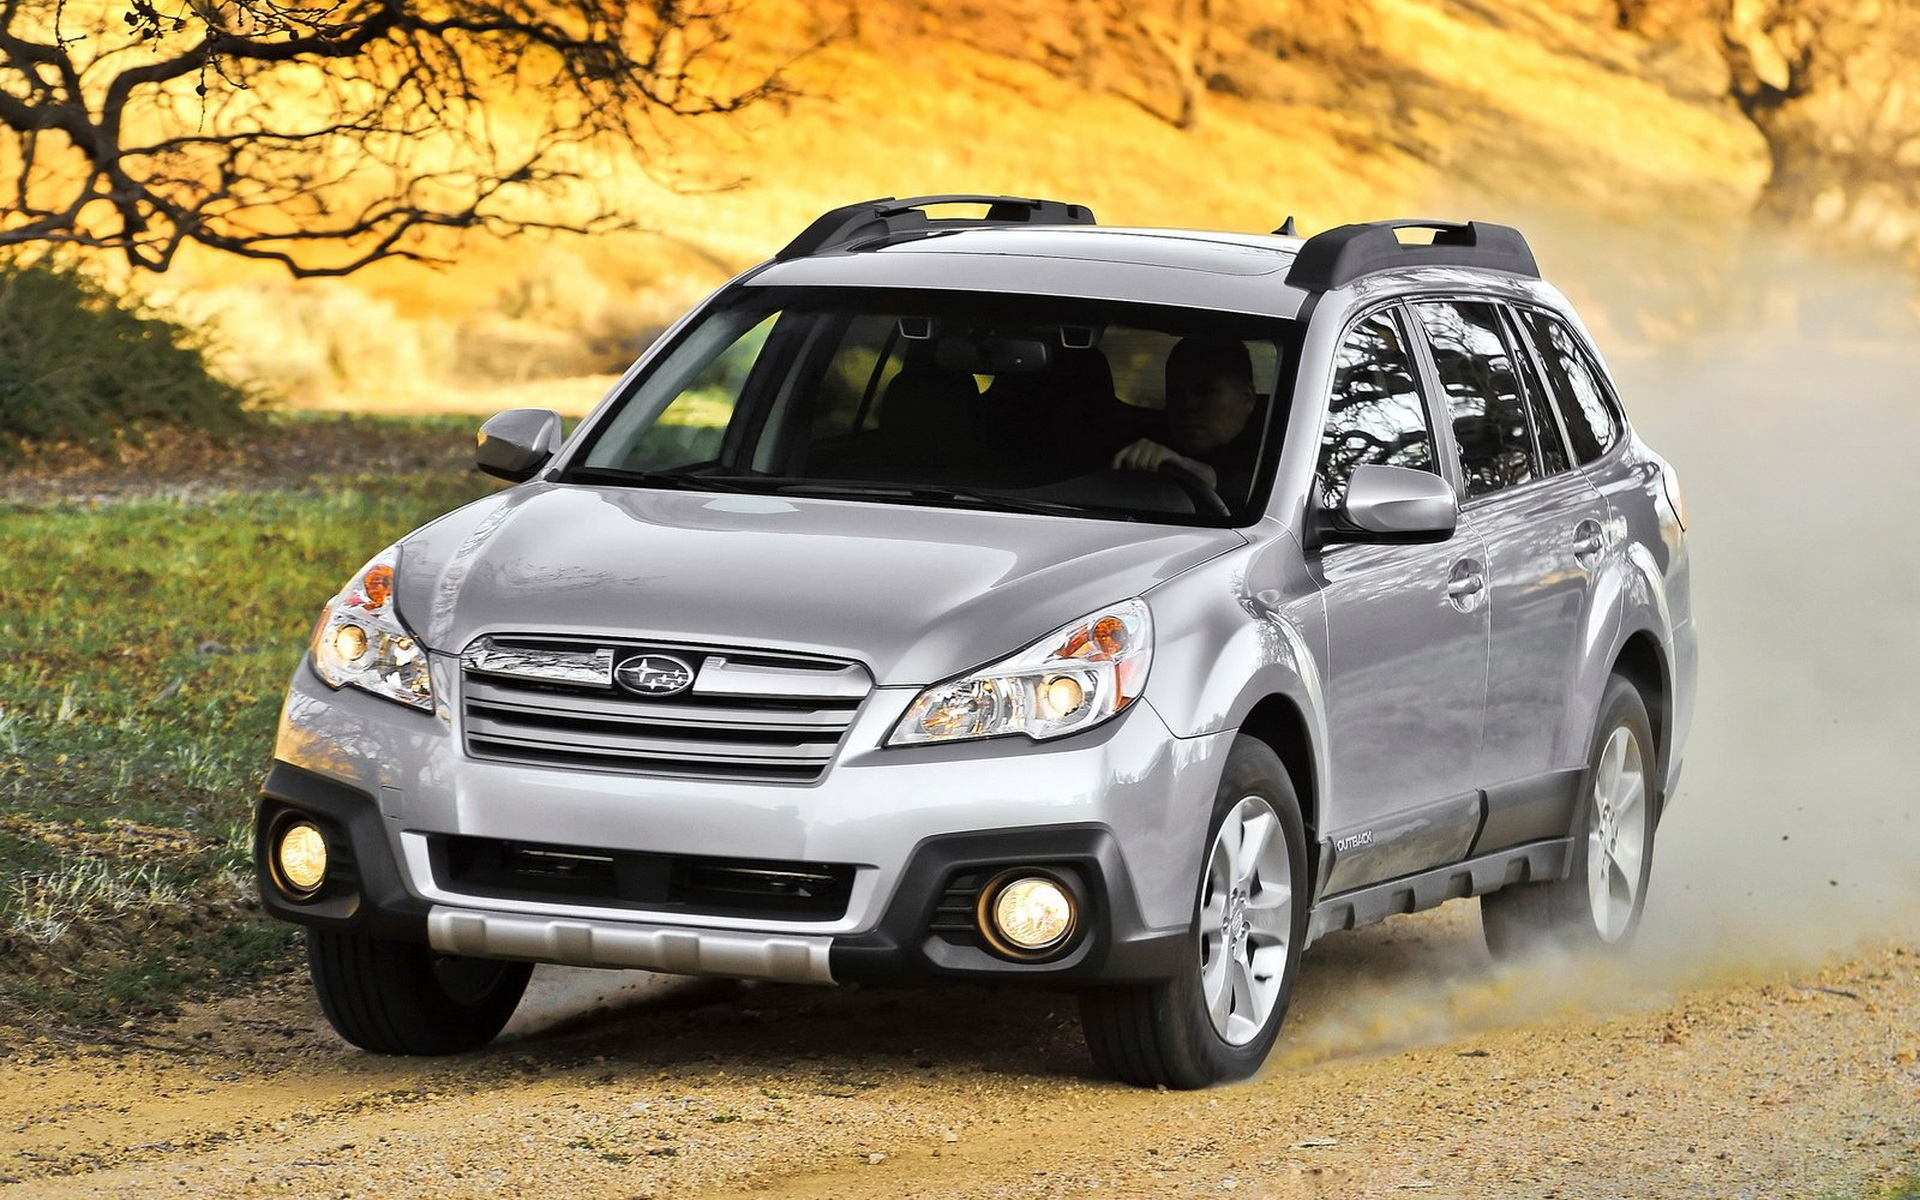 Subaru Outback 2013 Review, Amazing Pictures and Images